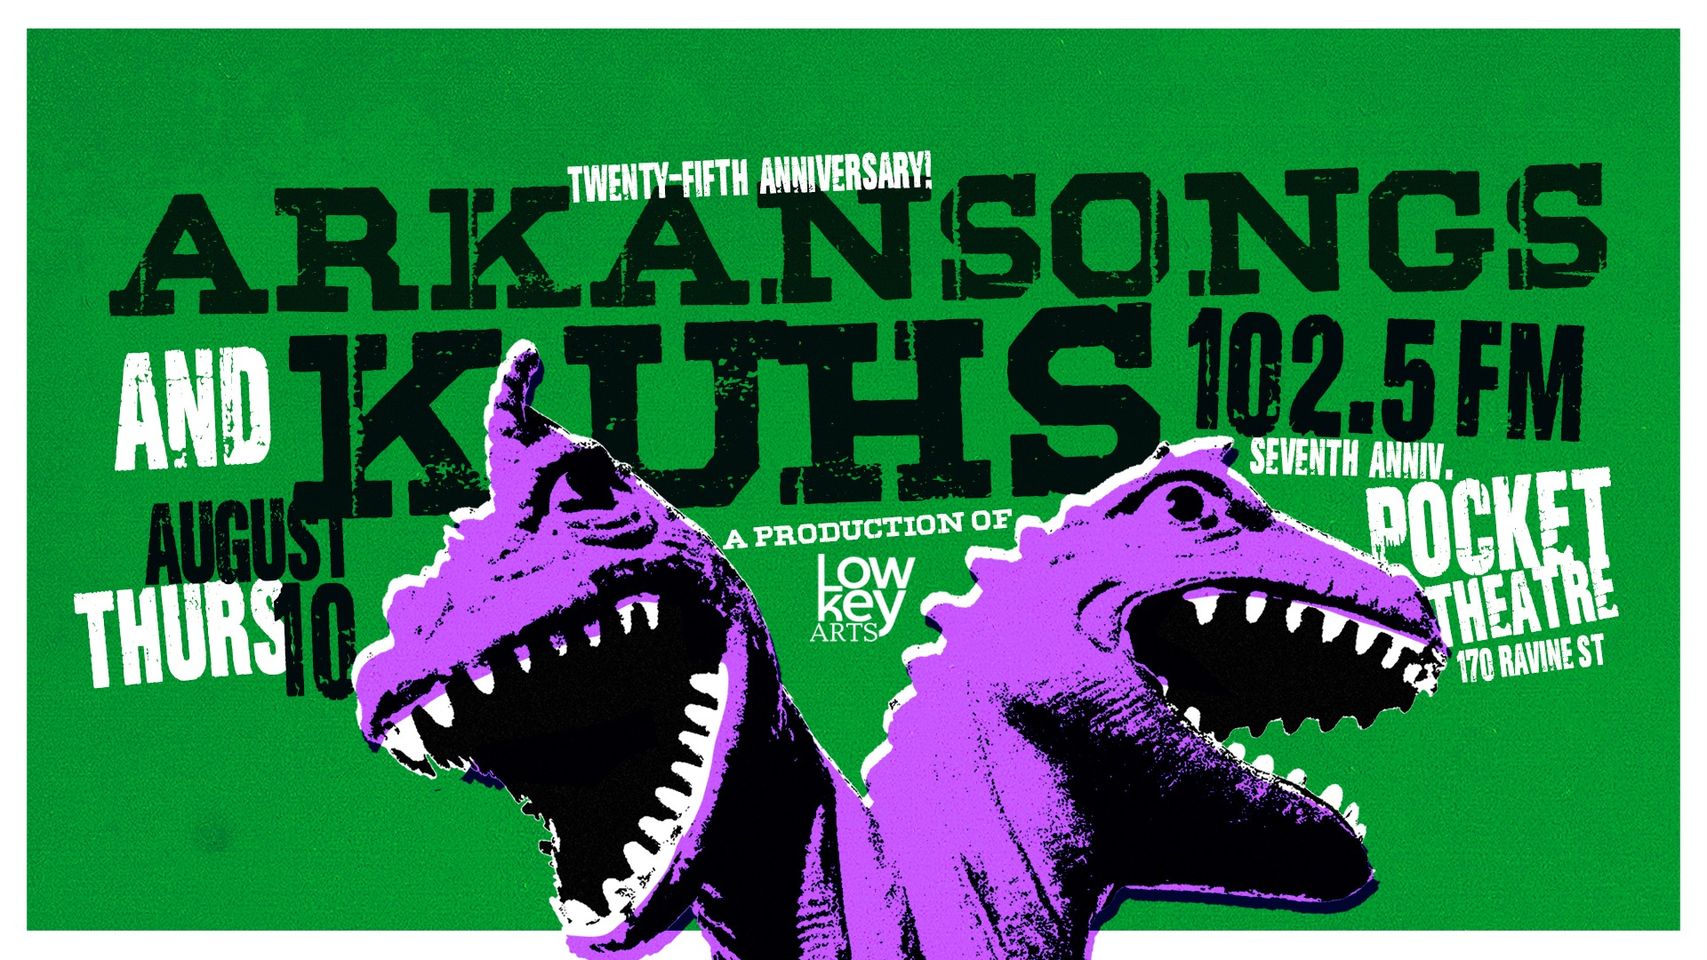 Flyer for KUHS-LP 102.5 FM and Arkansongs Dual Anniversary, Thursday, August 10th at the Pocket Community Theatre, 170 Ravine Street in Hot Springs, Arkansas.